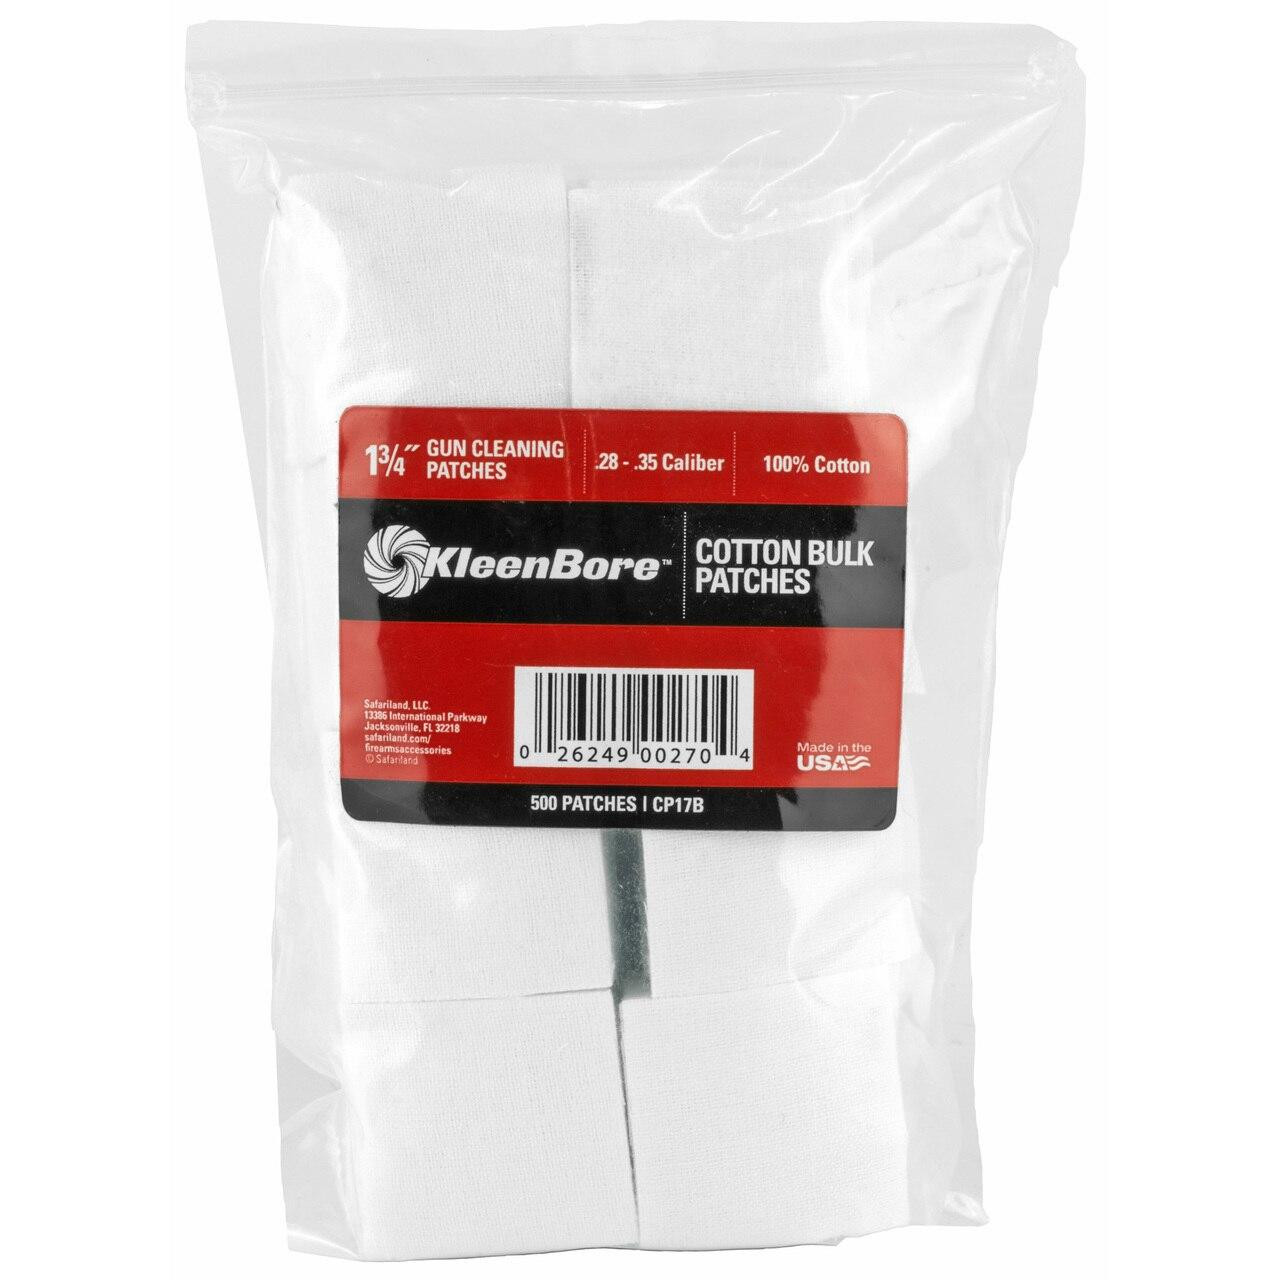 Kleen-Bore Kleen Br Spr Patch 28-35 500pk - CT35KLBCP17B 026249002704